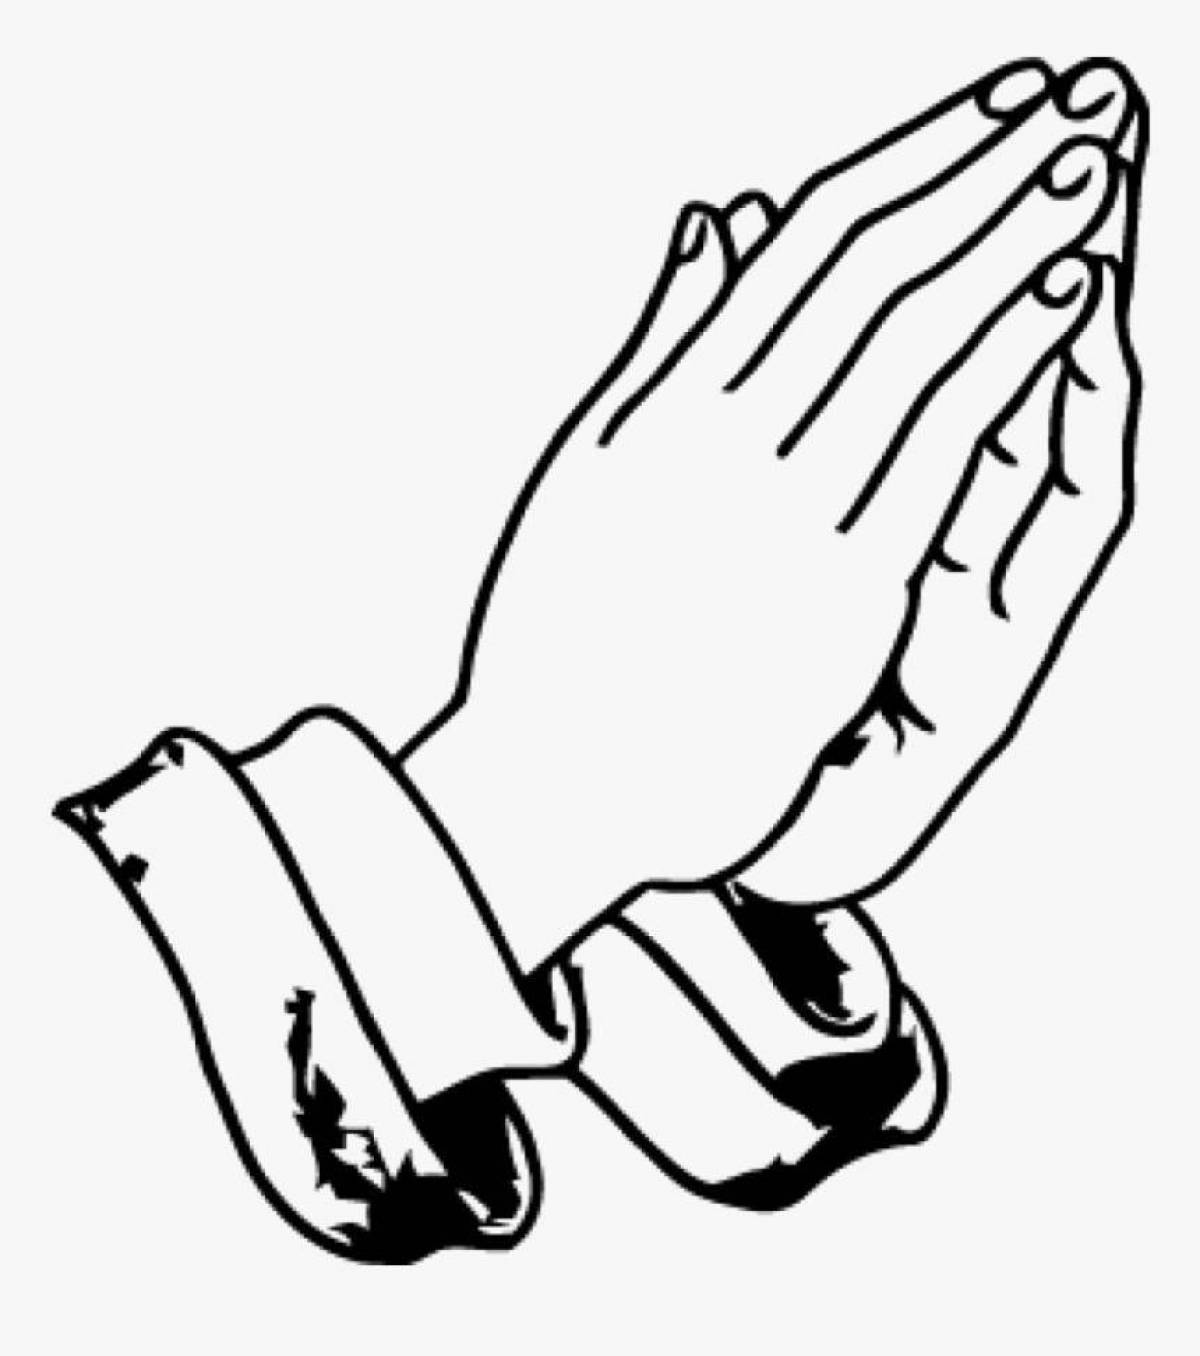 Coloring page soulful prayer